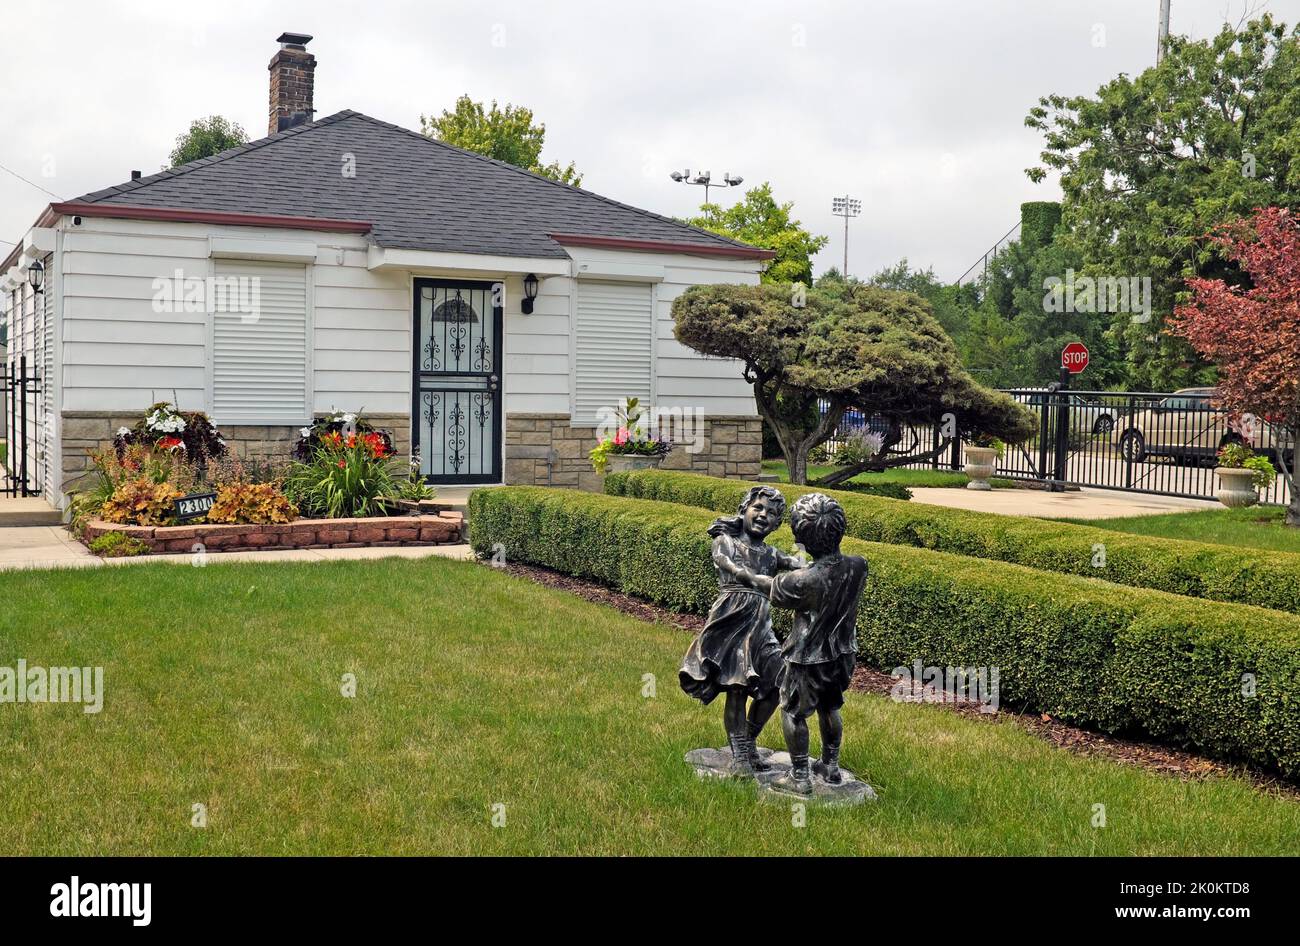 The childhood house of Michael Jackson at 2300 Jackson Street in Gary, Indiana has become a place of homage for the late singer. Stock Photo